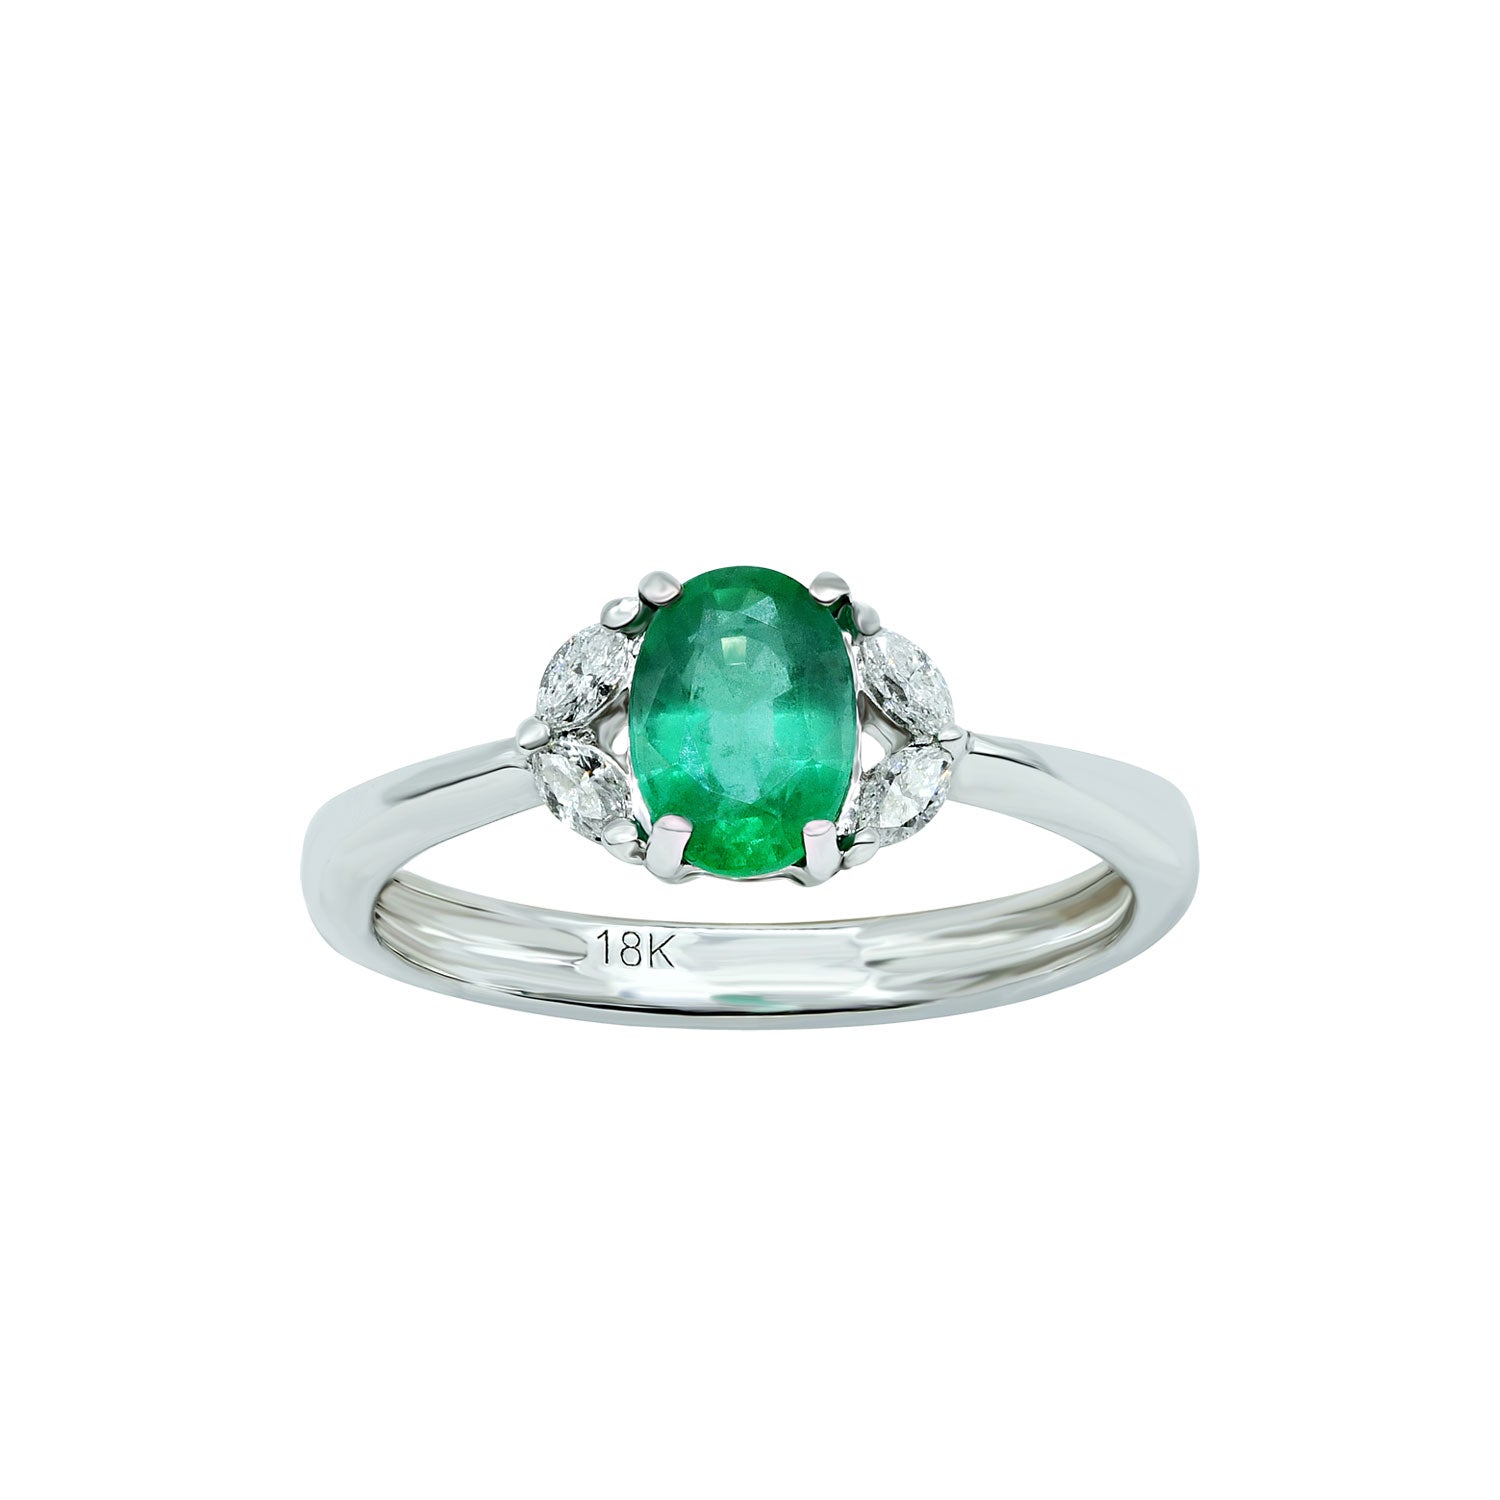 White Gold ring with Oval emerald surrounded by oval diamonds